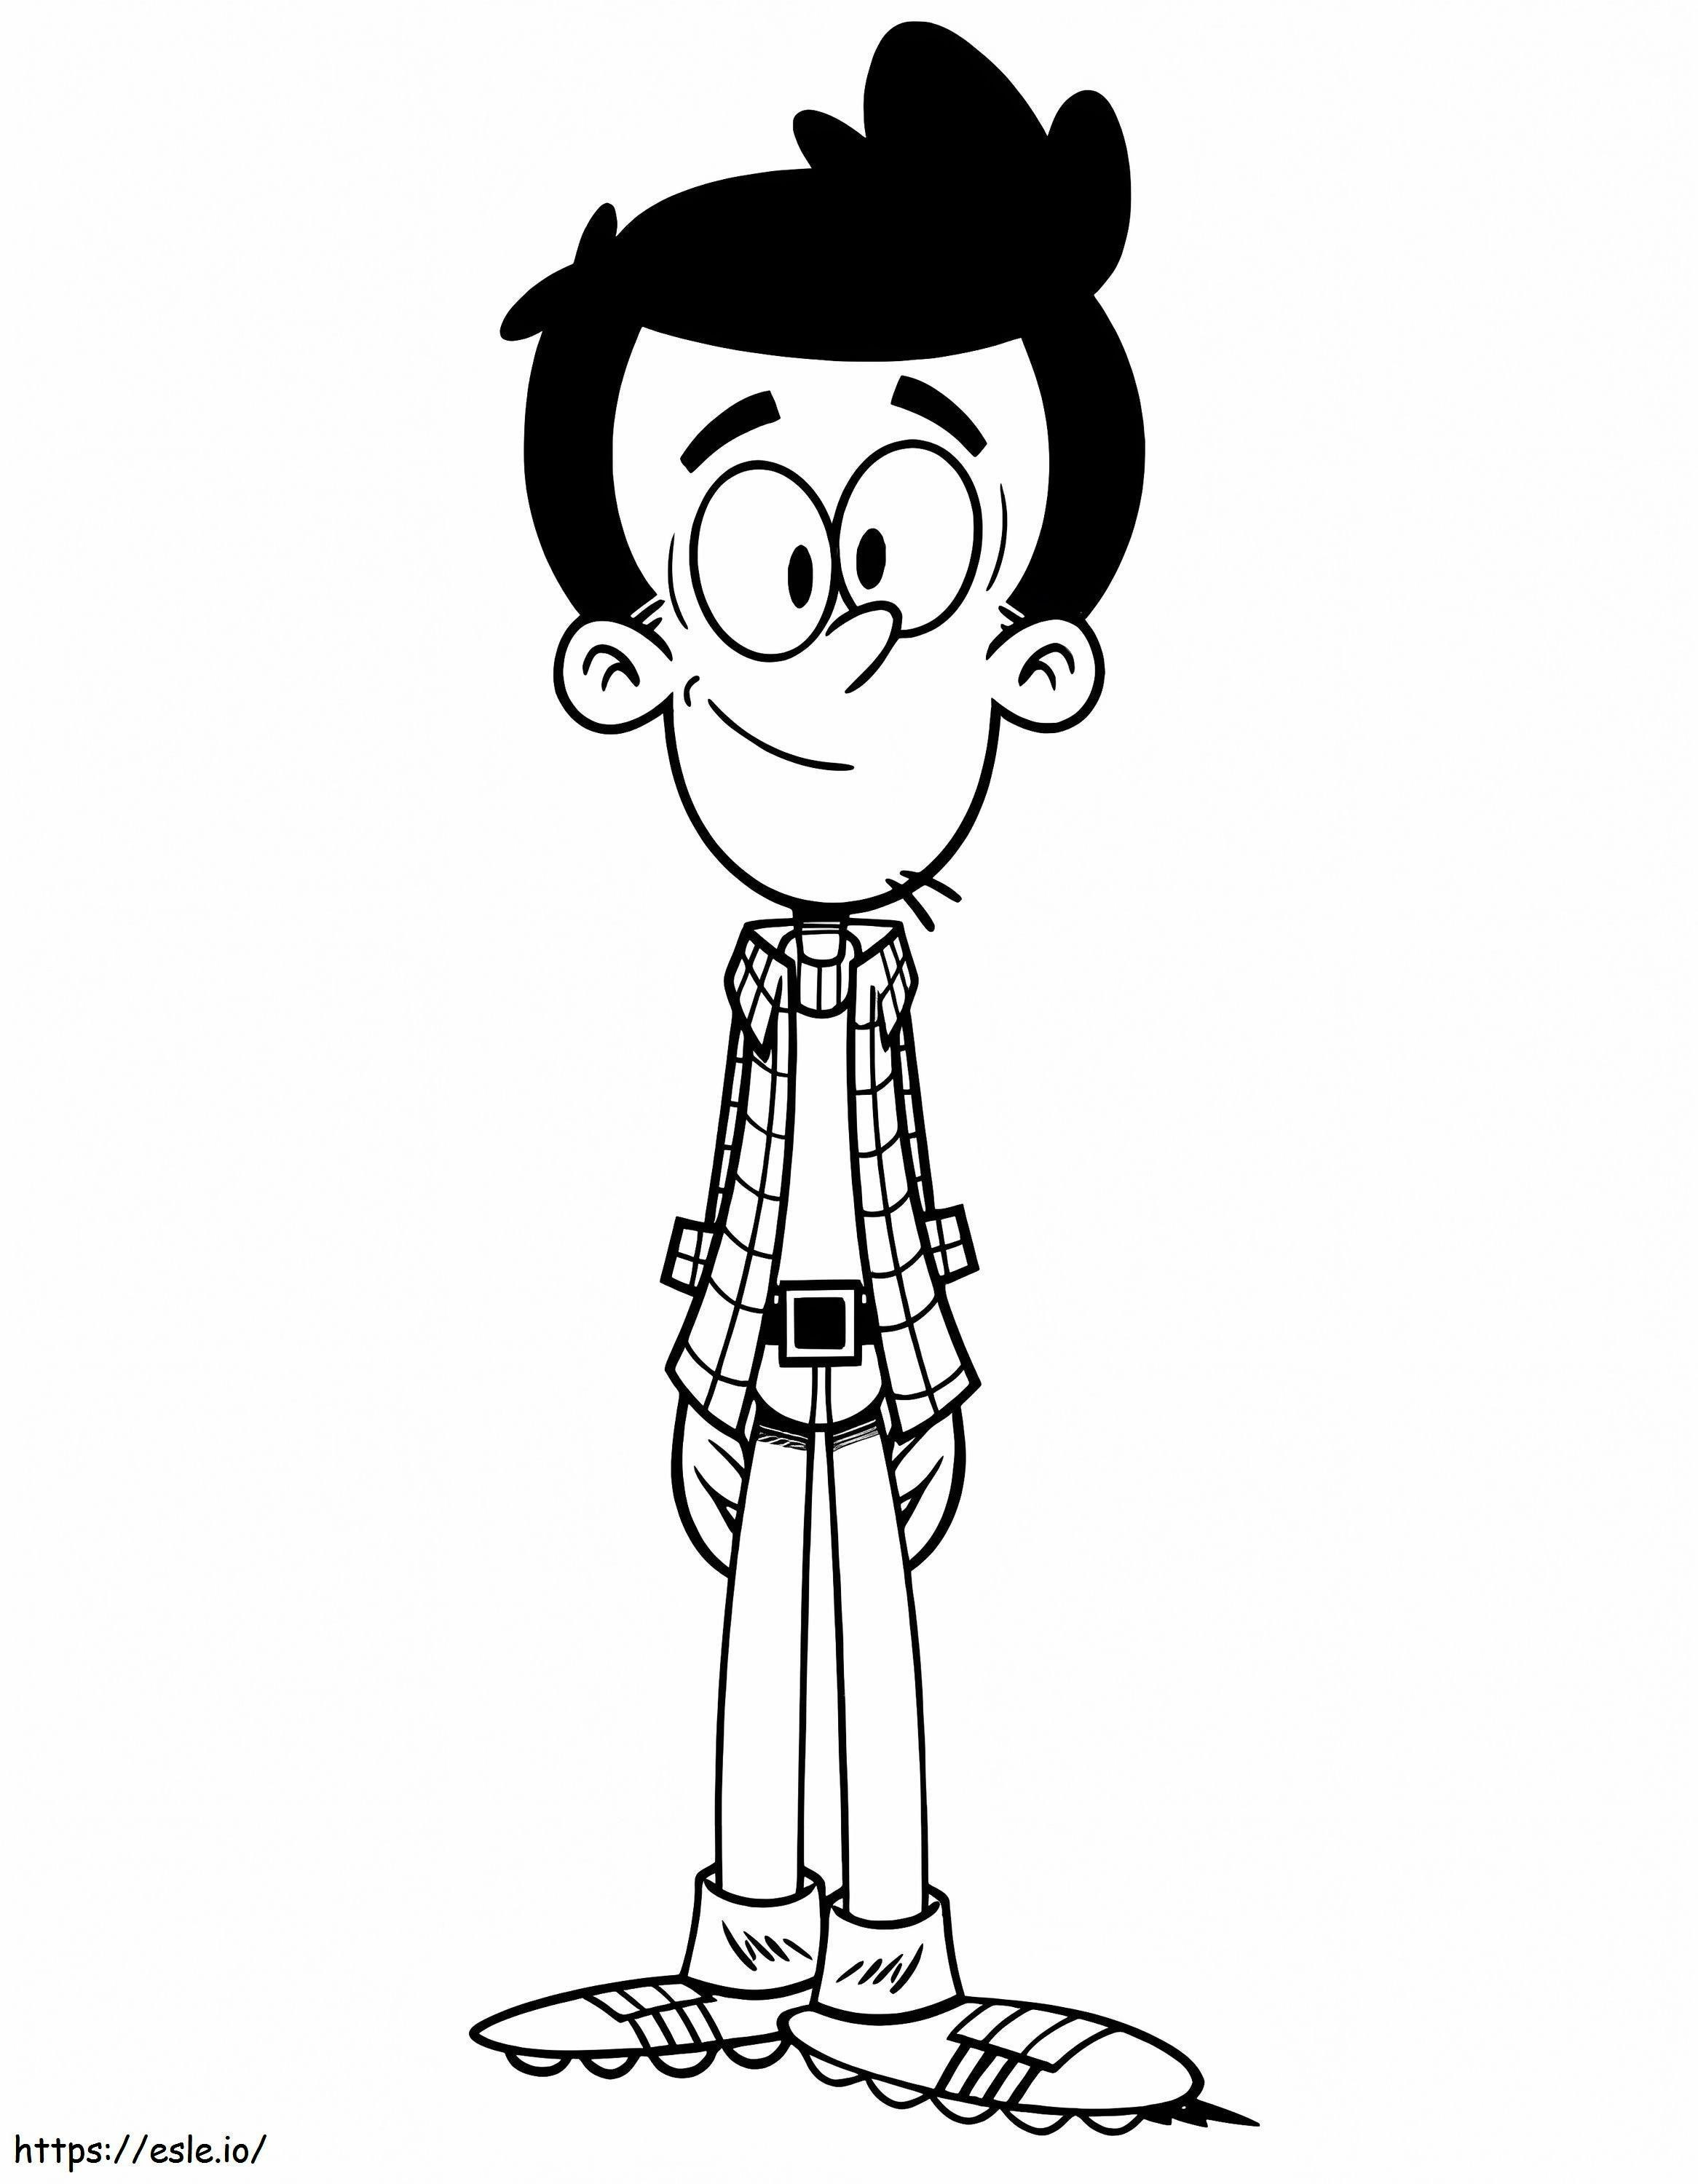 Bobby Loud House coloring page